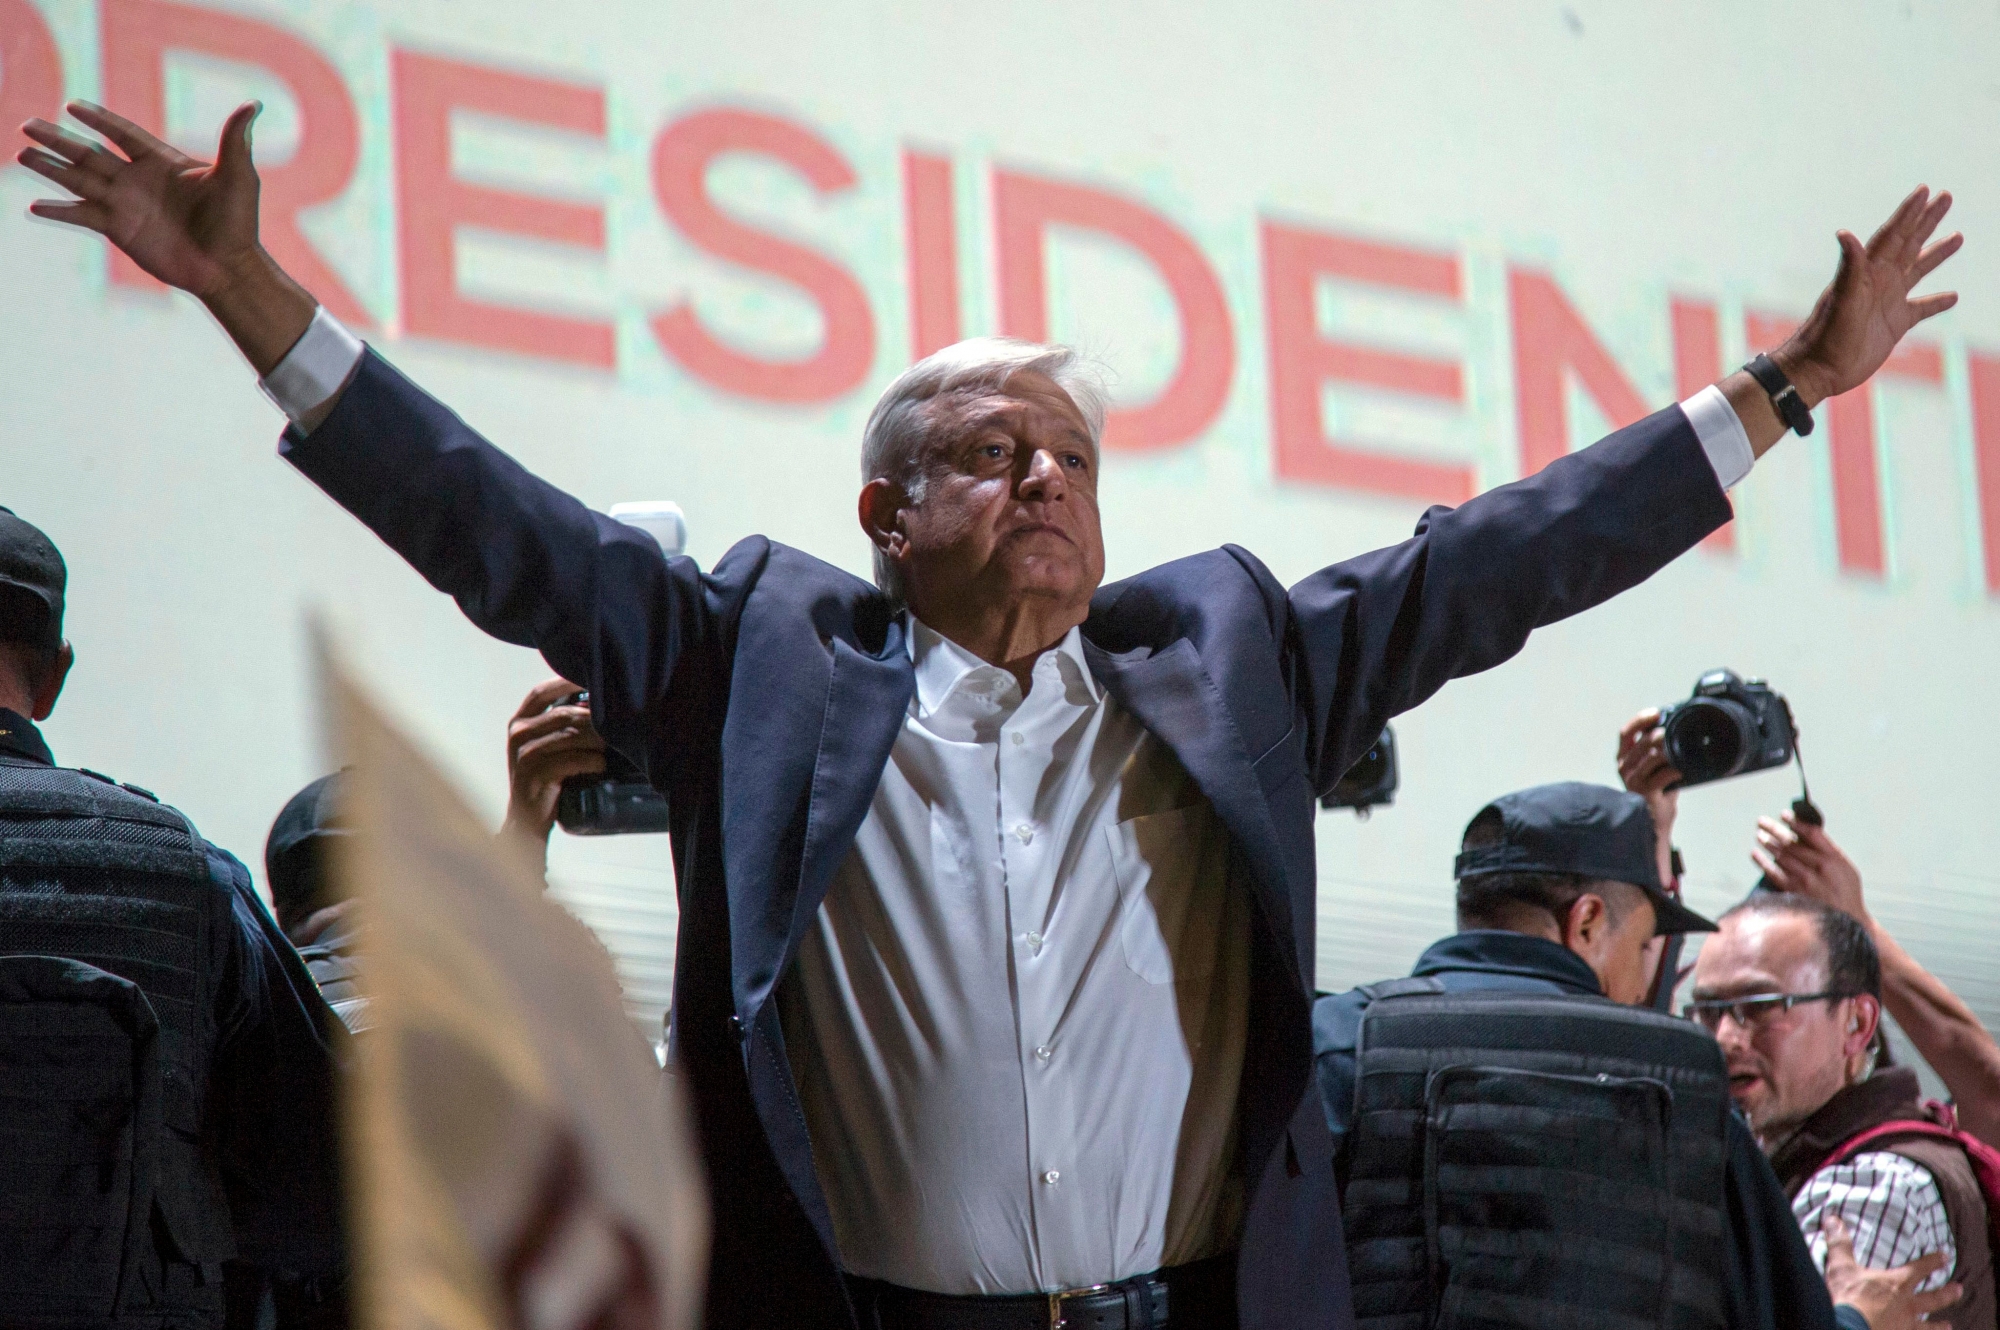 Presidential candidate Andres Manuel Lopez Obrador acknowledges his supporters as he arrives to Mexico City's main square, the Zocalo, Sunday, July 1, 2018. Lopez Obrador has claimed victory in Mexico's presidential election, calling for reconciliation. (AP Photo/Anthony Vazquez) Mexico Elections